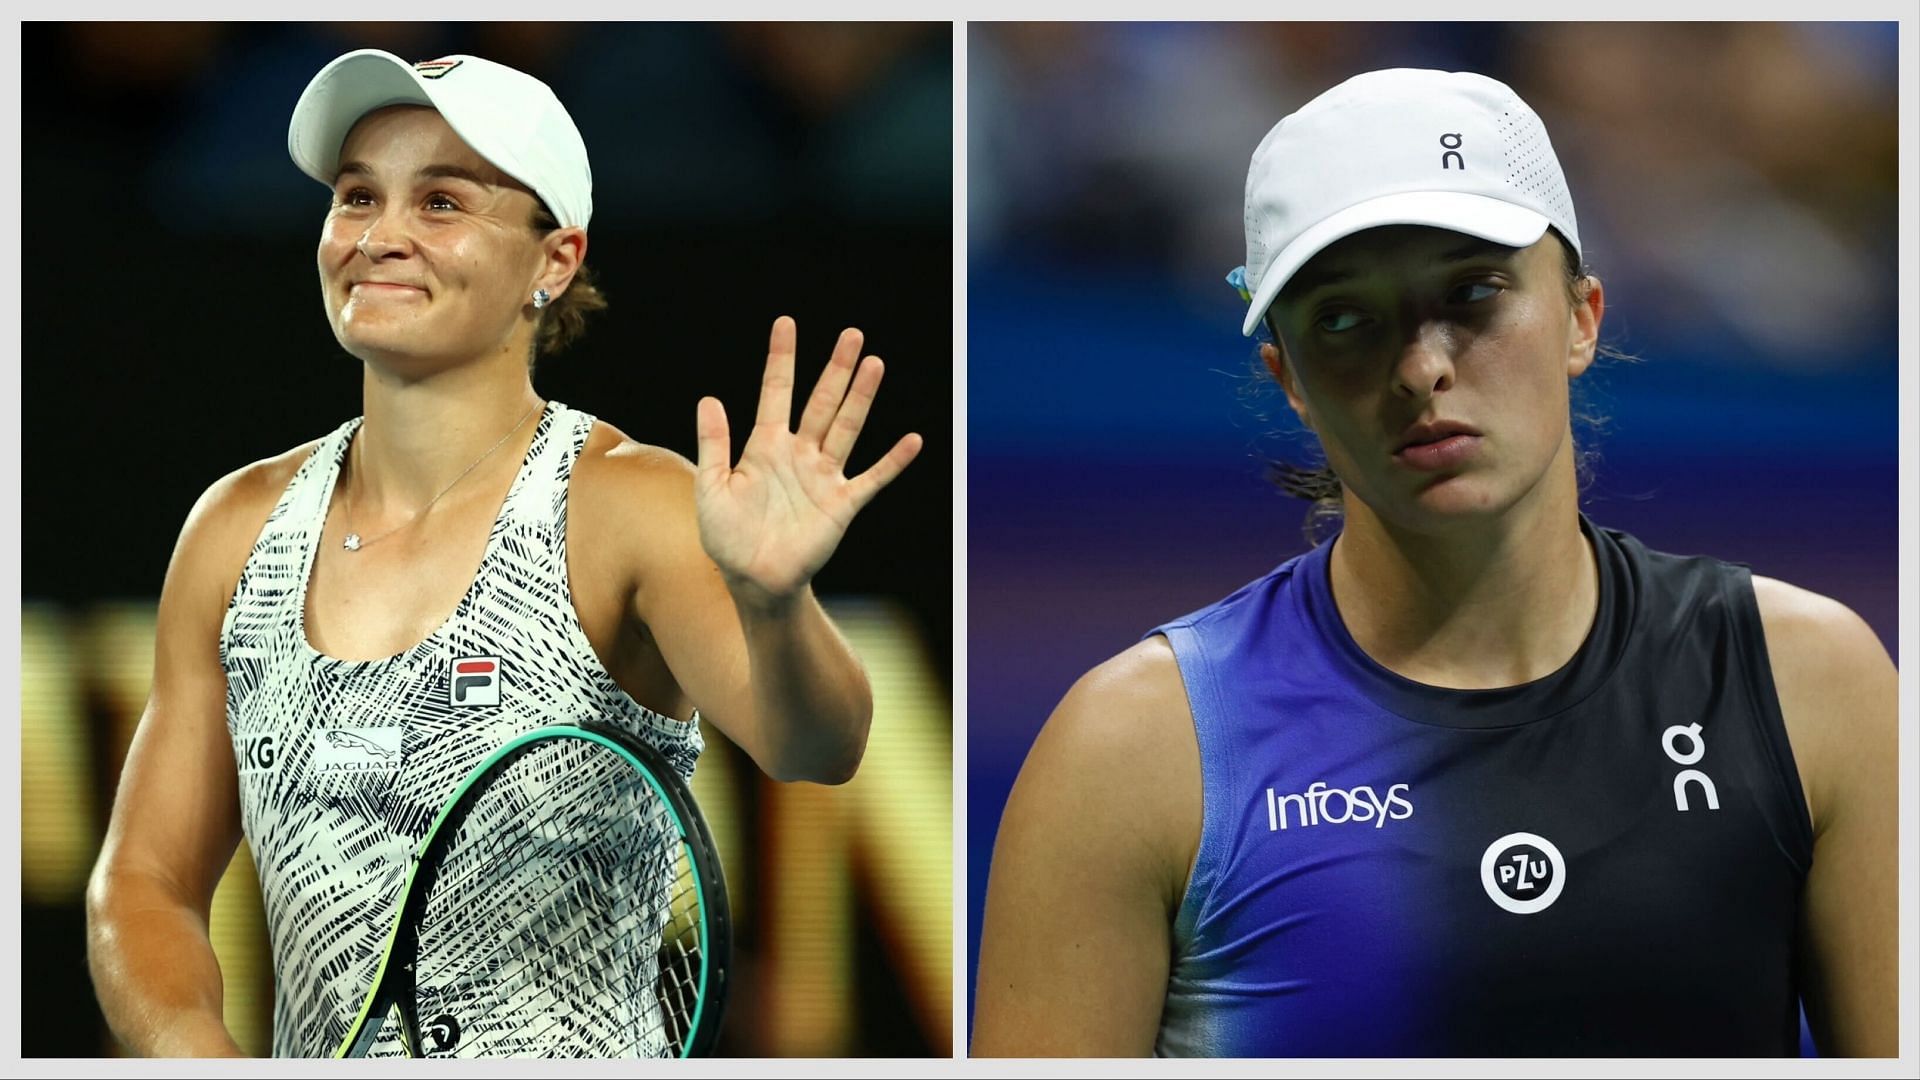 Fans were excited after learning that Ashleigh Barty is set to return to Wimbledon this year for an invitational doubles match (Source: Getty Images)